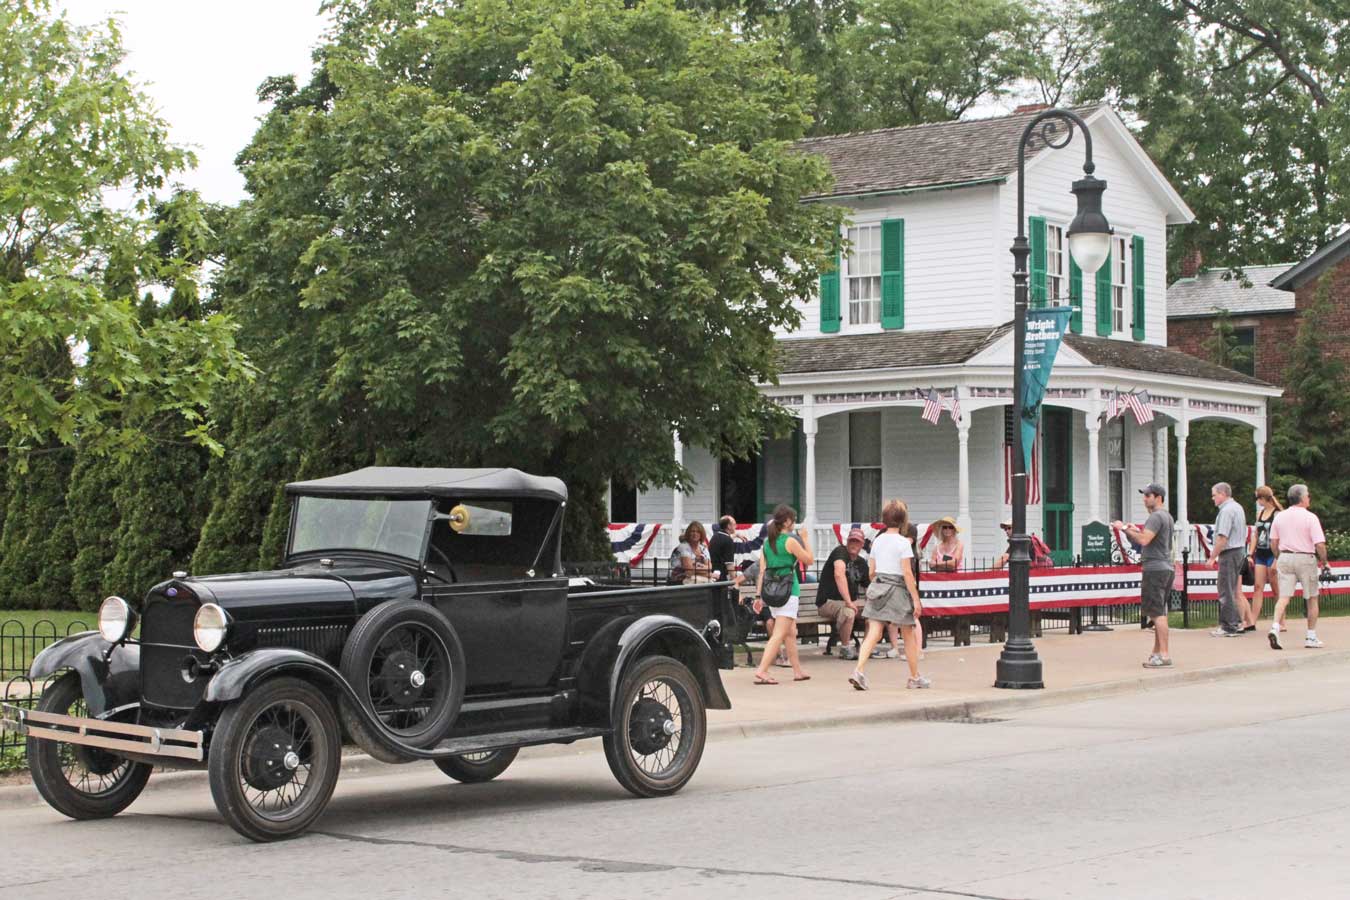 5 Greenfield Village Activities You Might Have Missed - Wading in Big Shoes